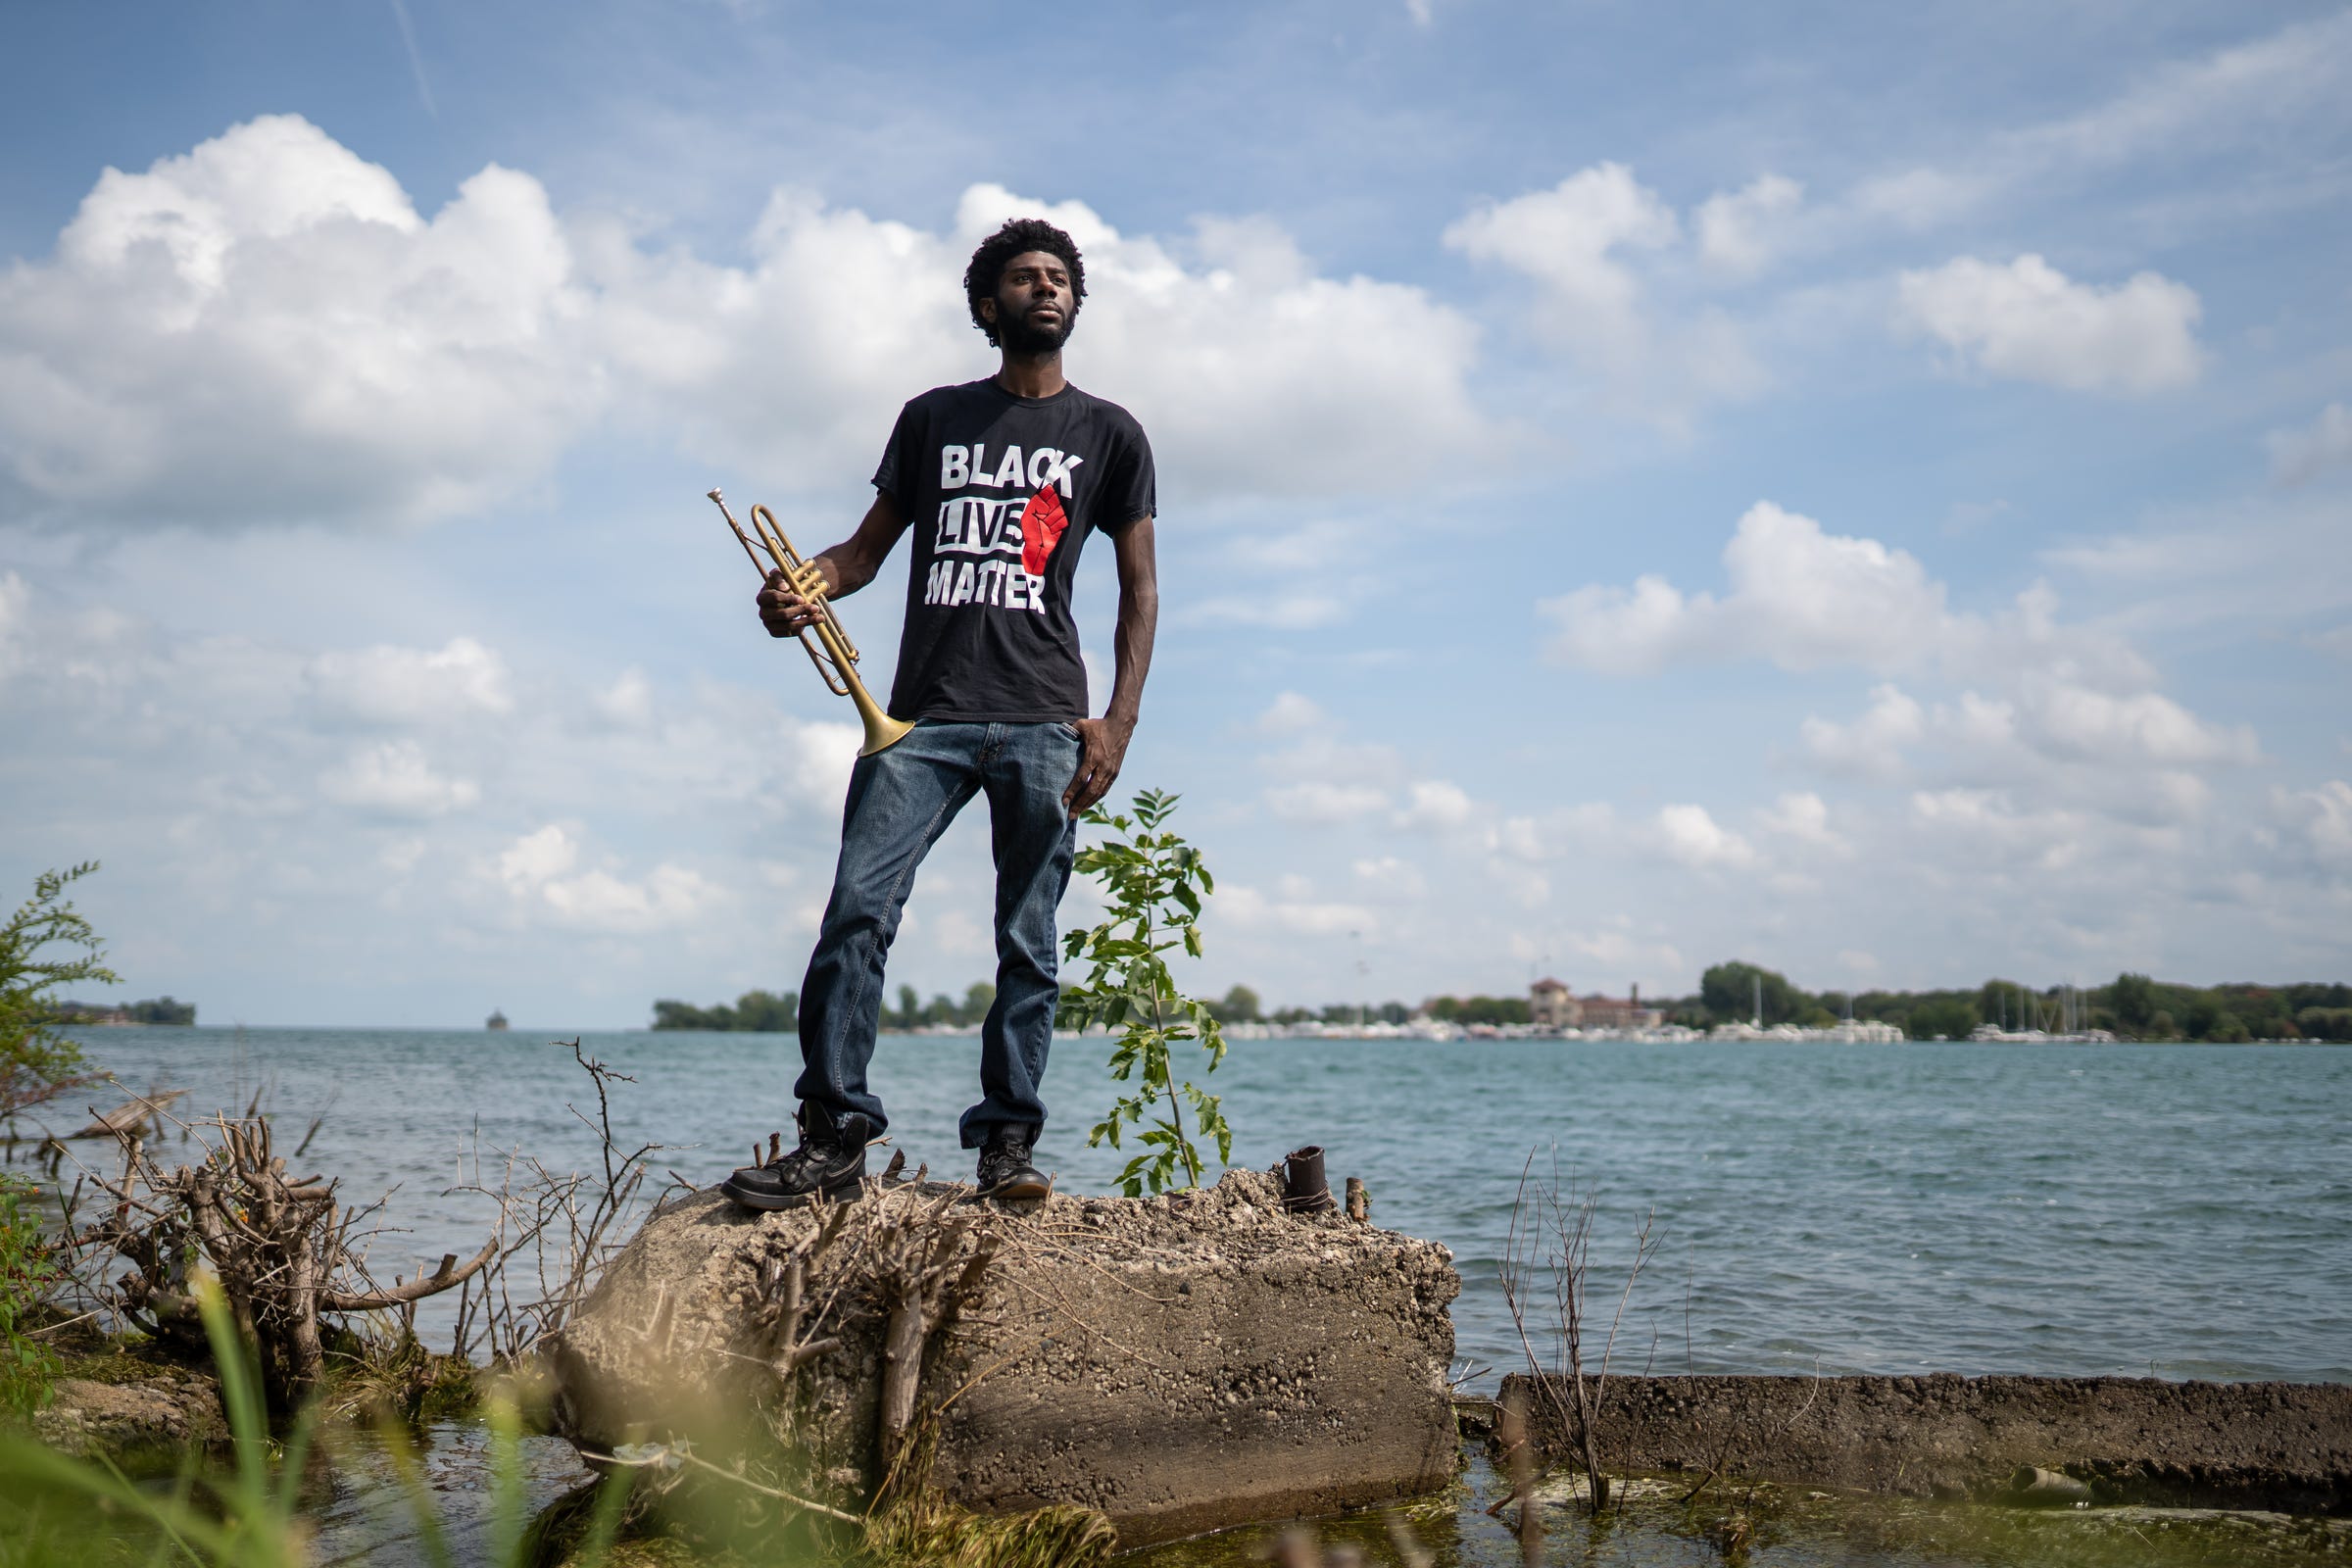 Detroit Will Breathe member Allen Dennard, 26, of Detroit poses for a photo along the Detroit River on Tuesday, September 1, 2020. Dennard, who is a traveling musician, plays the trumpet for protesters as they march through the streets of Detroit against police brutality.